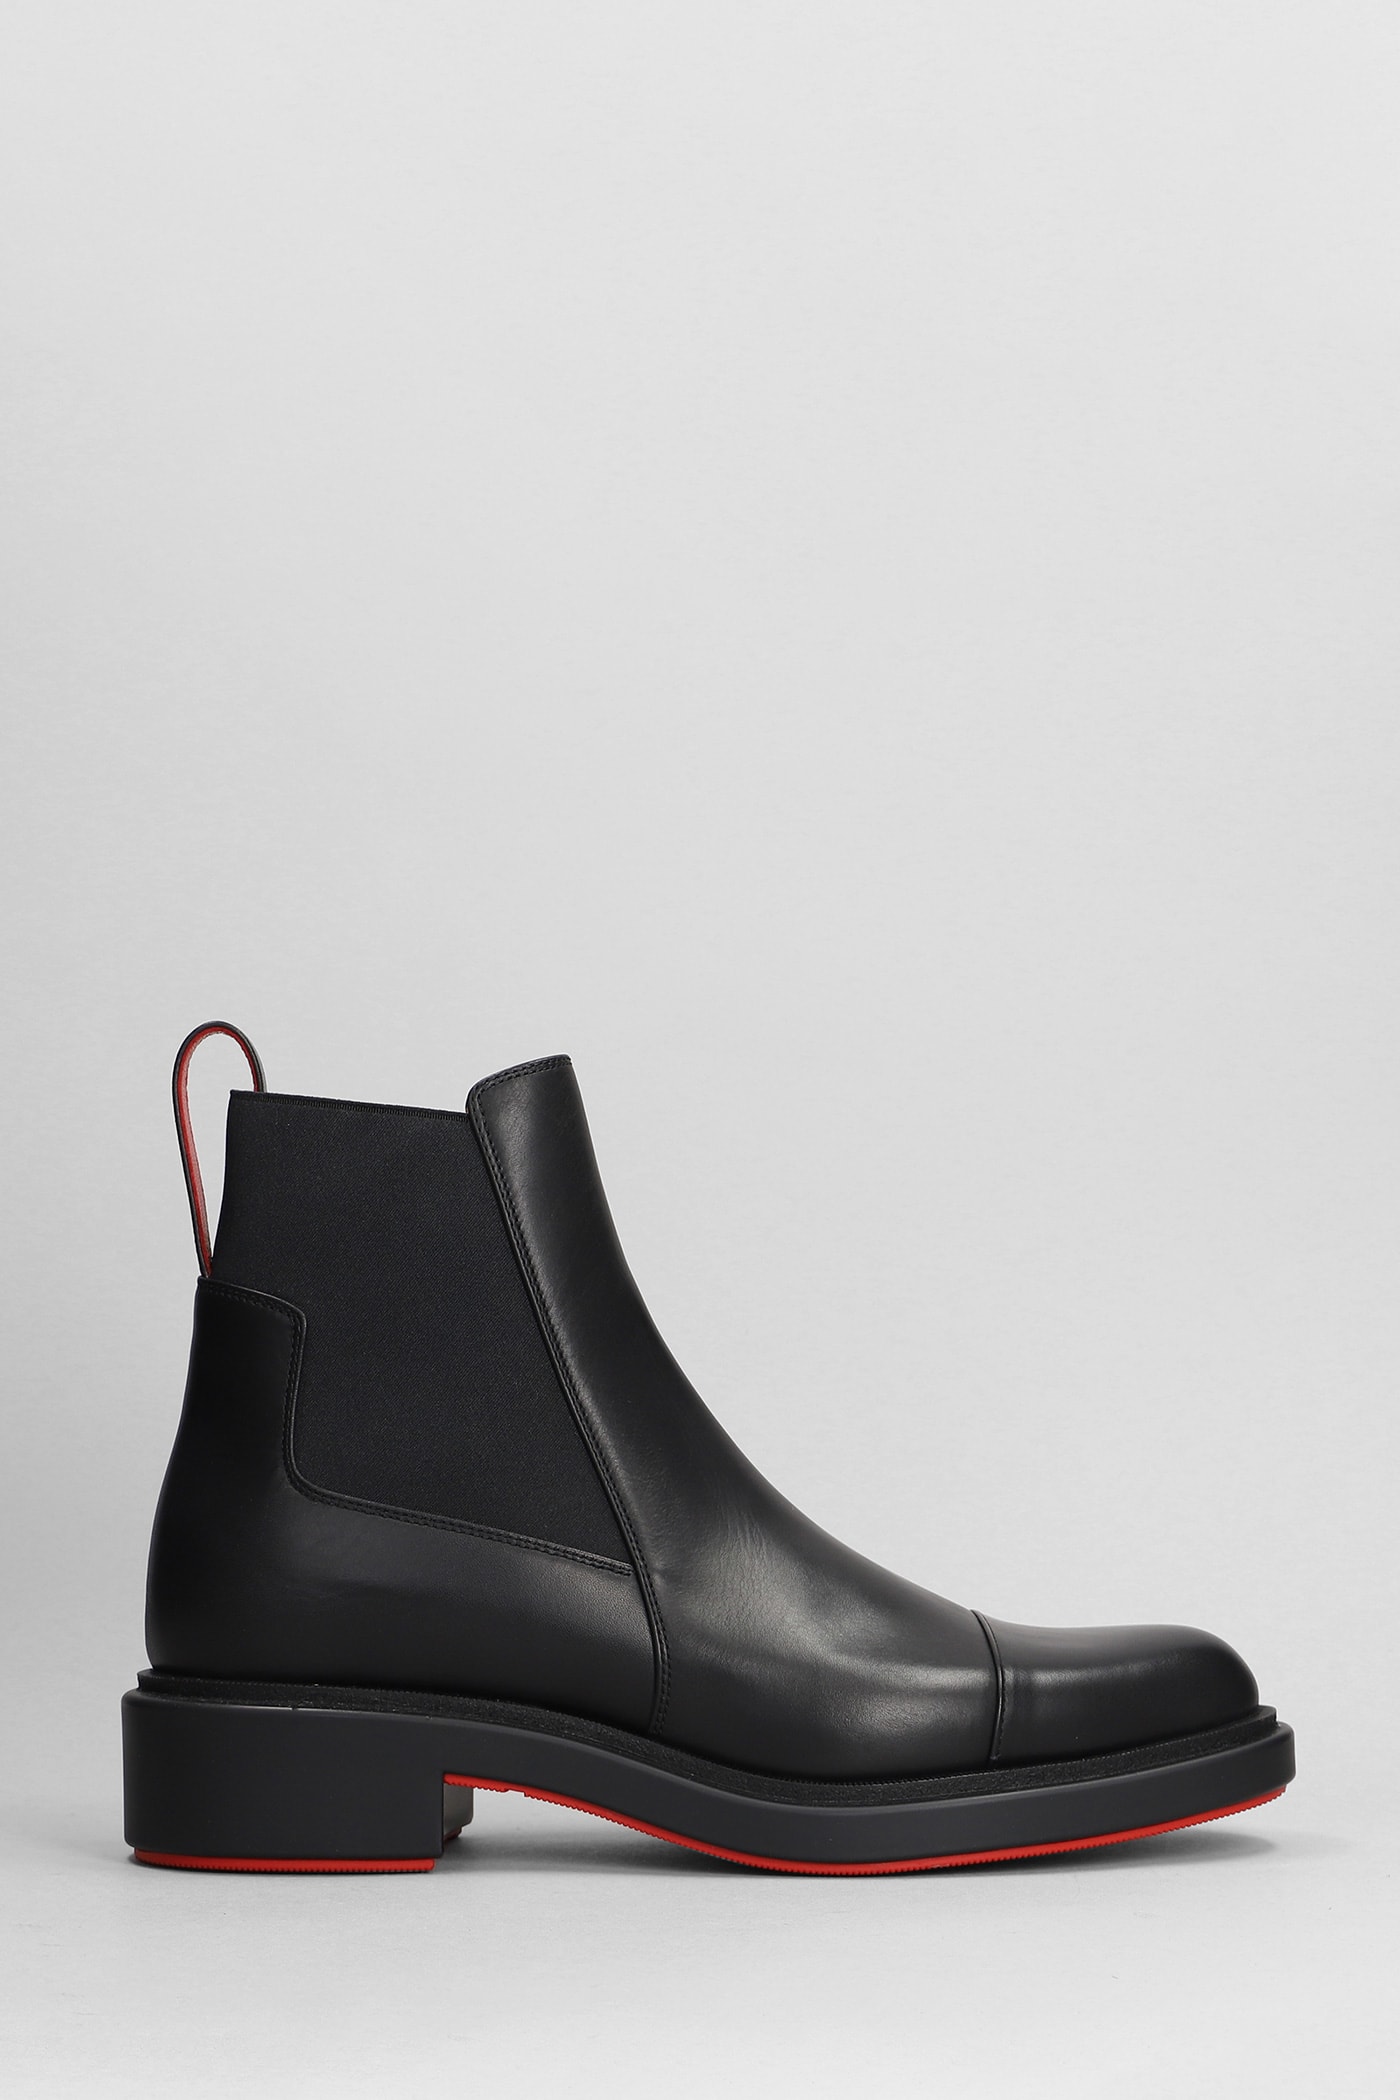 Urbino Ankle Boots In Black Leather